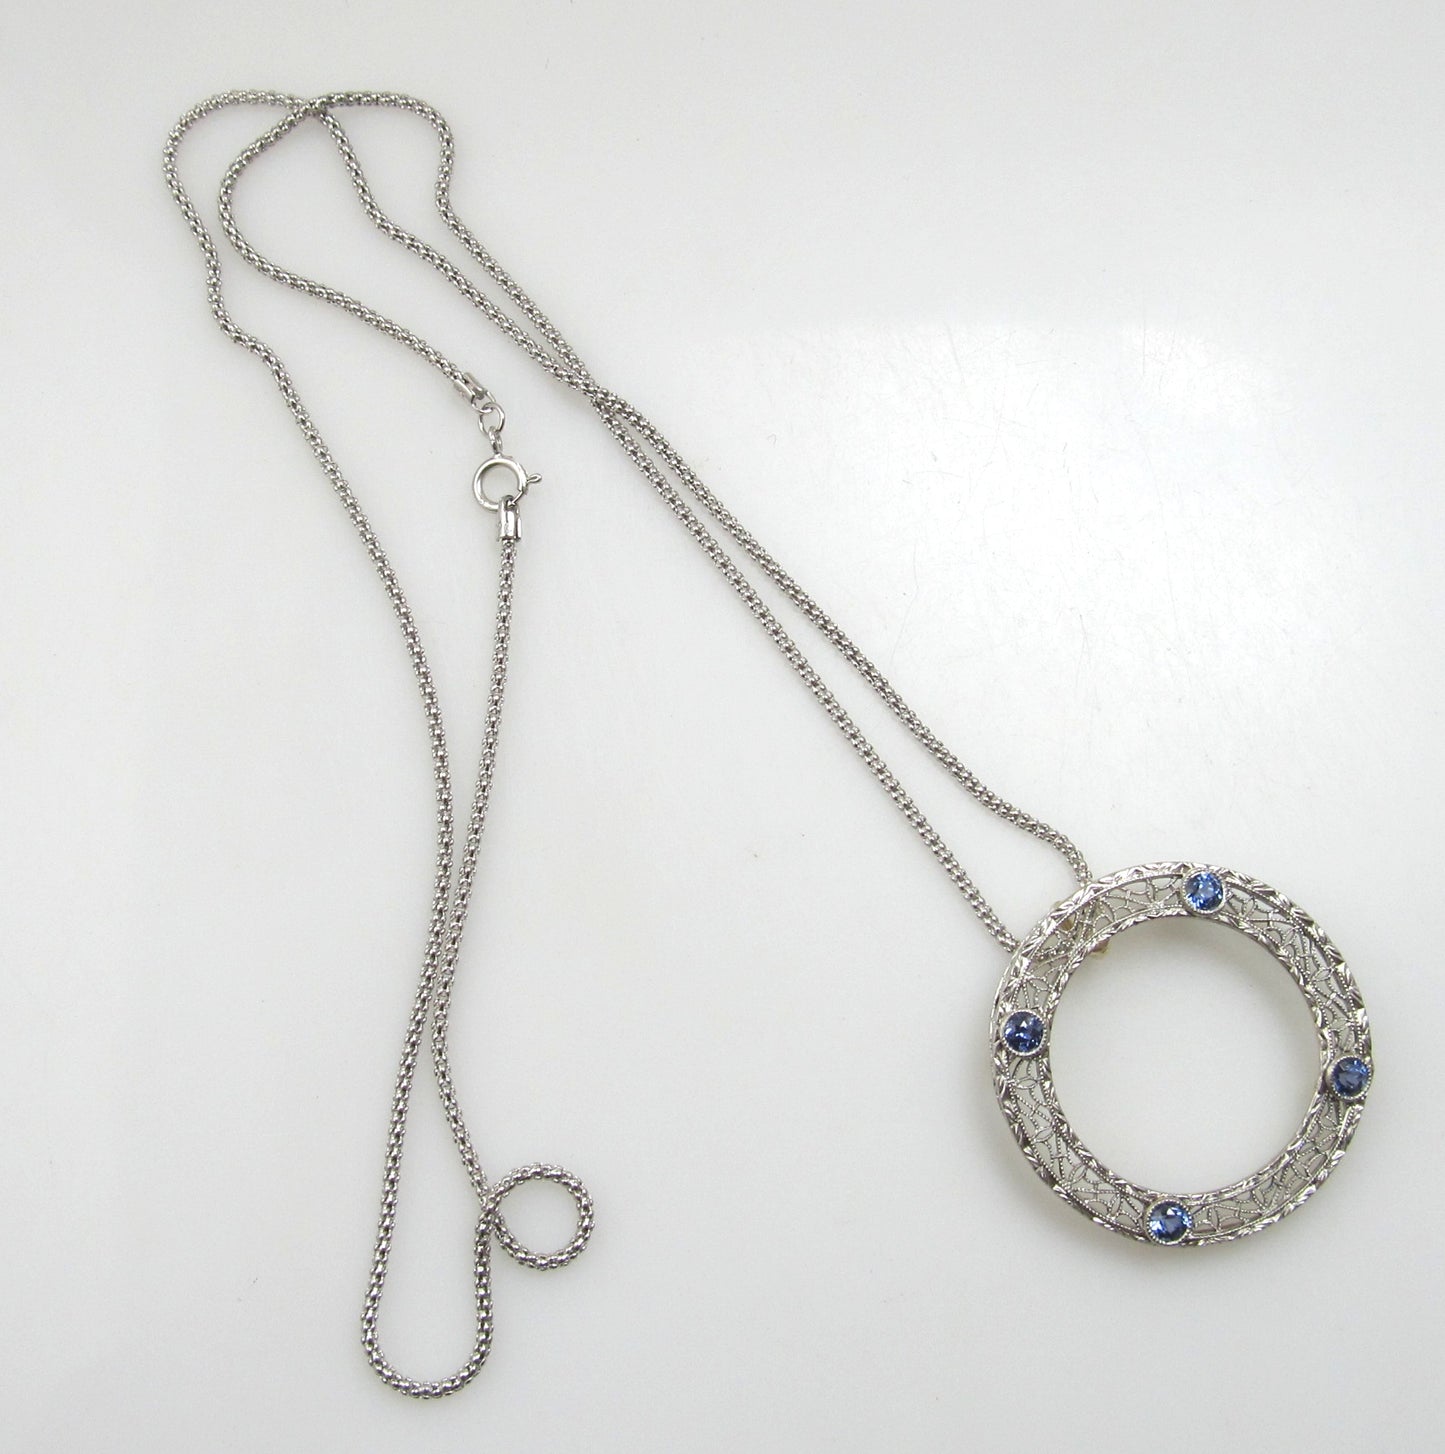 Antique filigree circle necklace with sapphires, circa 1920